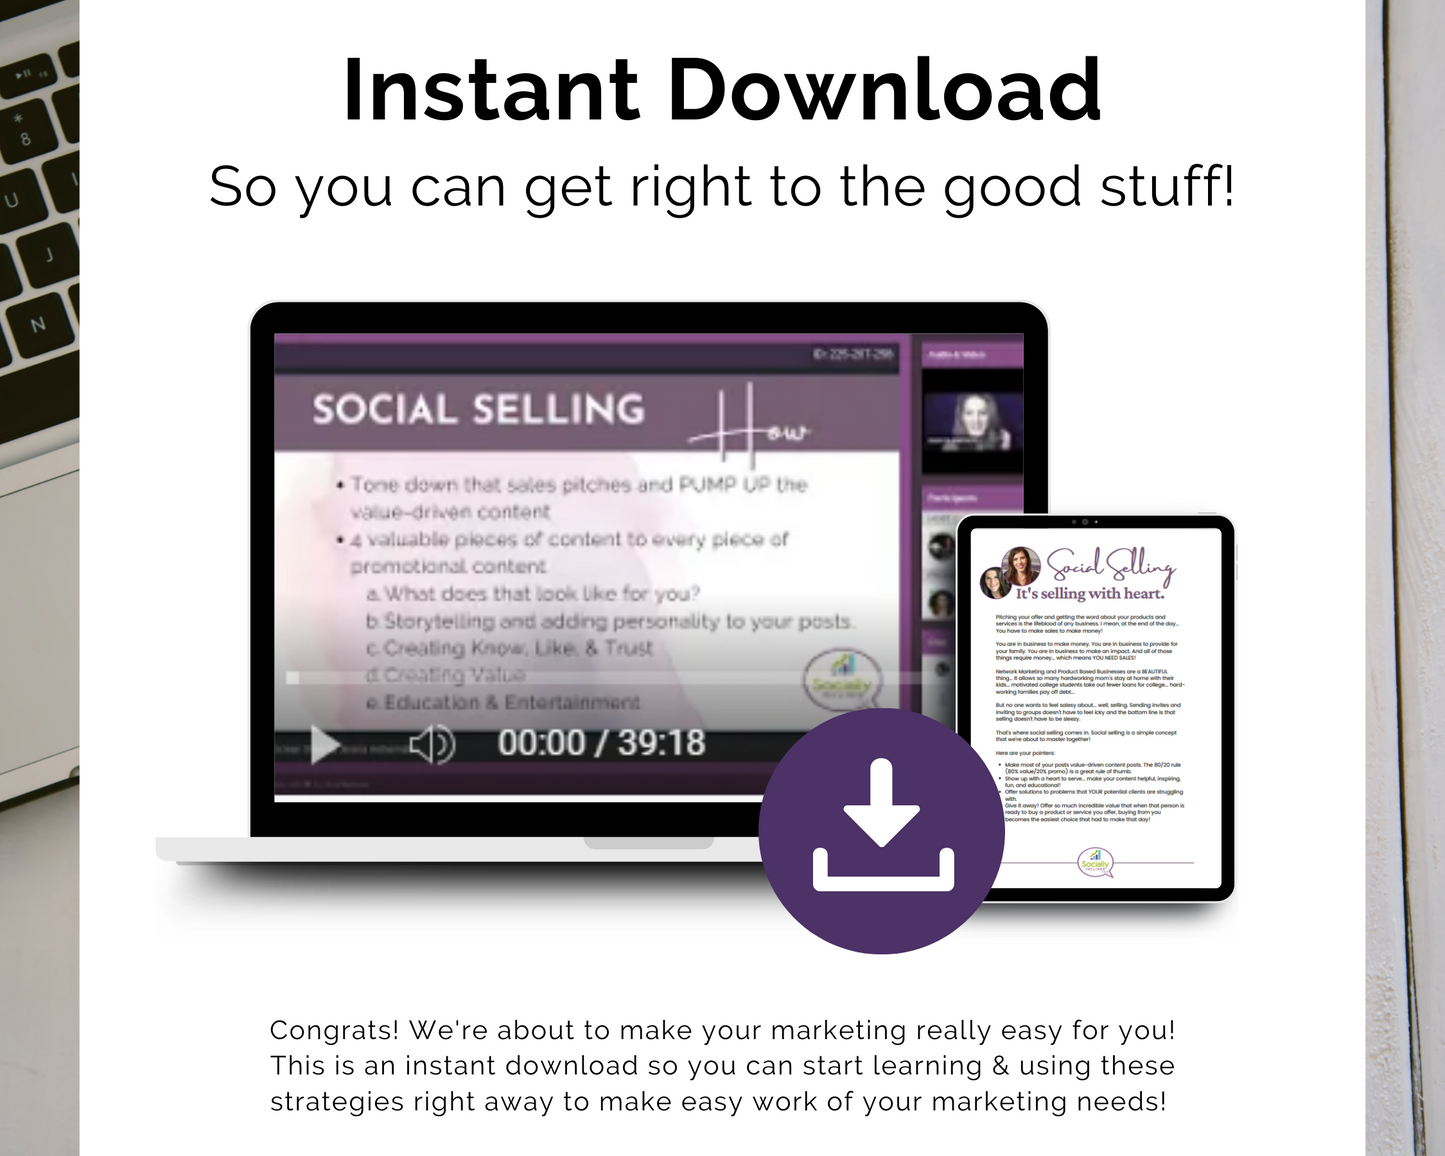 Get instant access to the TAT - Social Selling the Right Way Masterclass by Get Socially Inclined for a quick start to enjoy the good stuff.